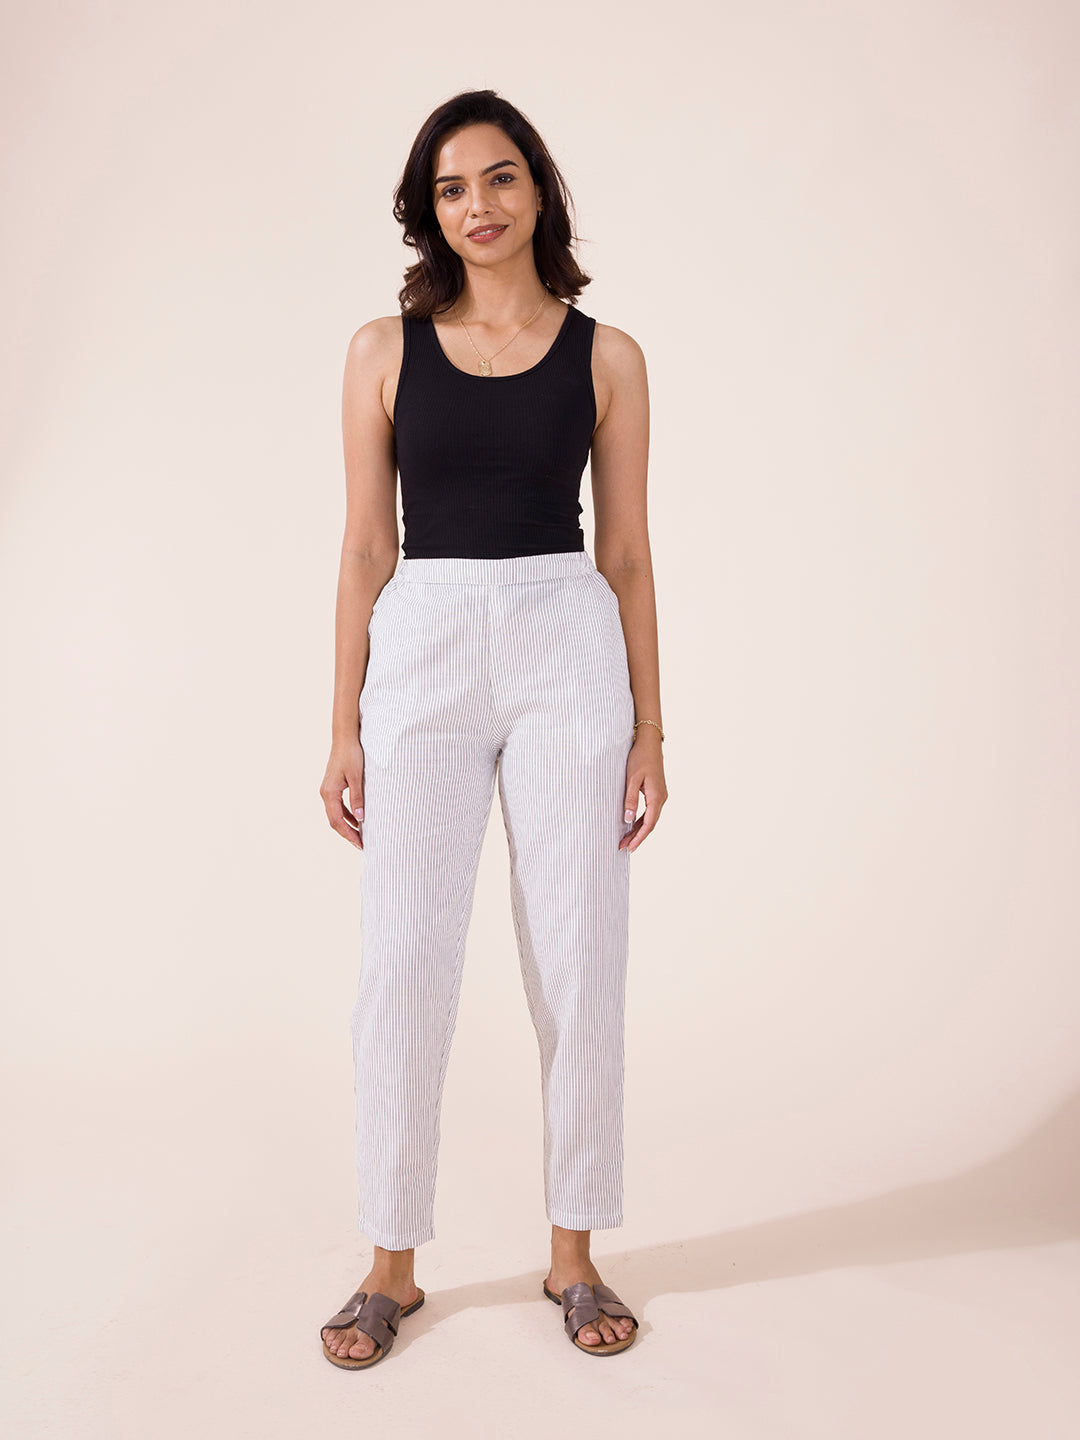 Buy Linen Pants For Women Online In India At Best Price Offers | Tata CLiQ